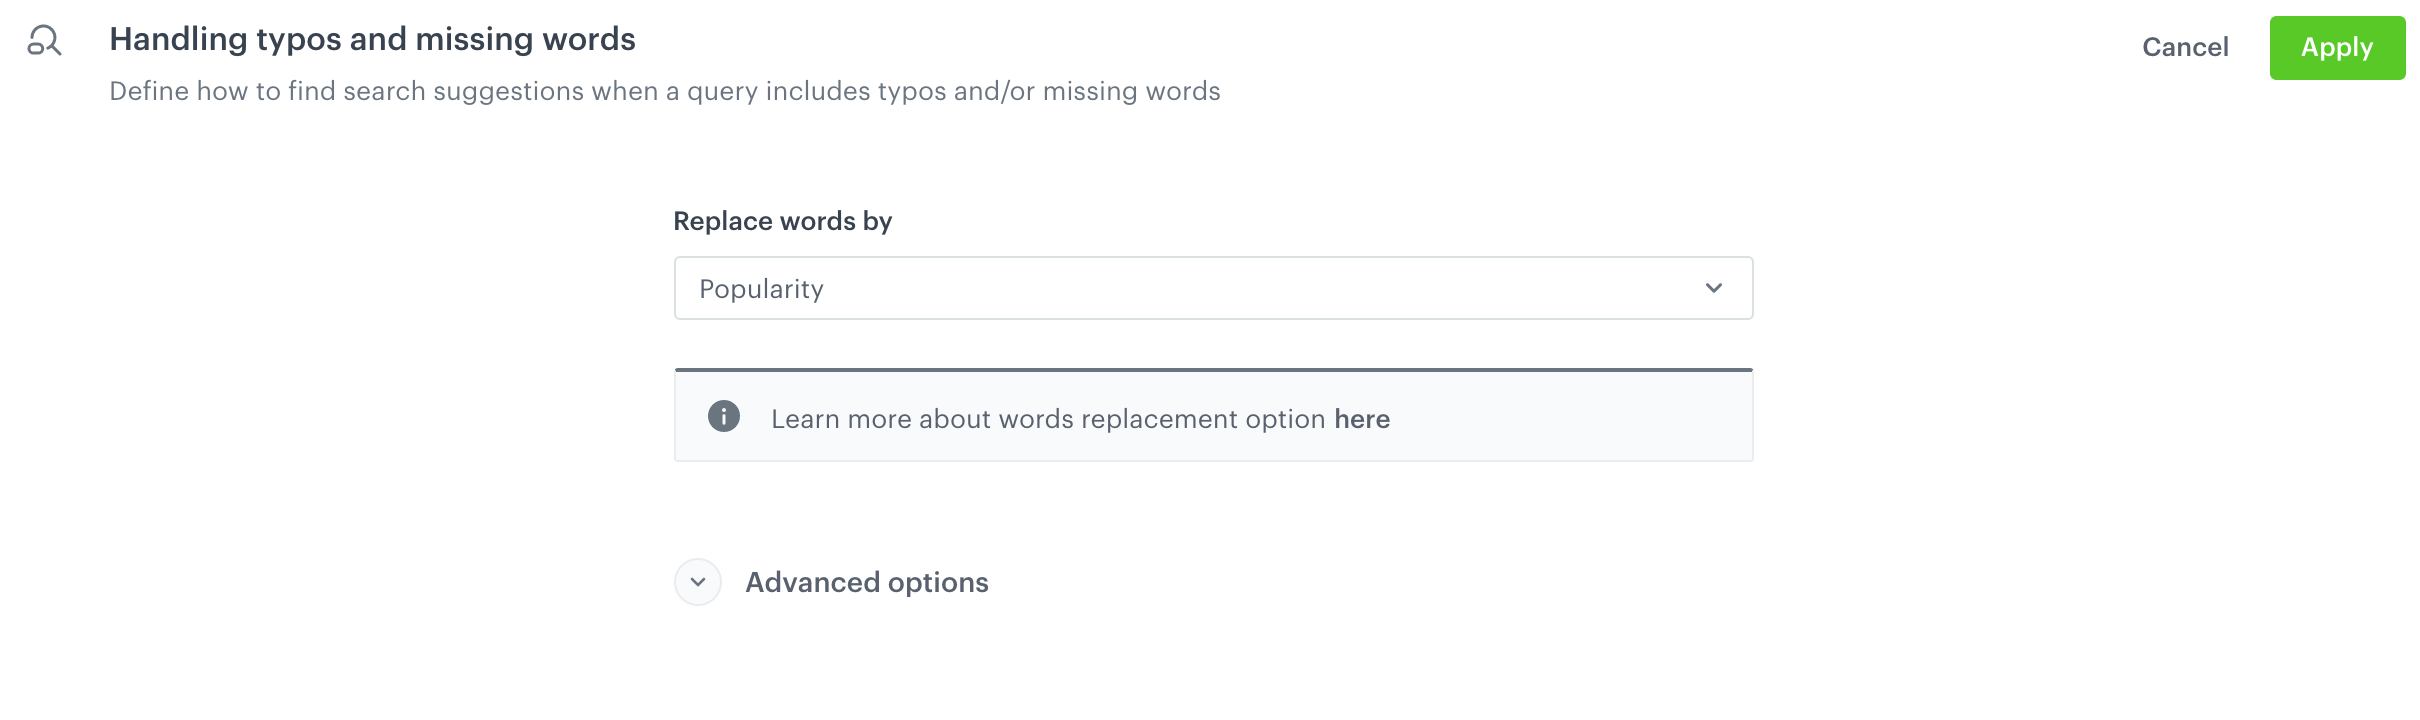 The configuration of handling typos and missing words in AI Search